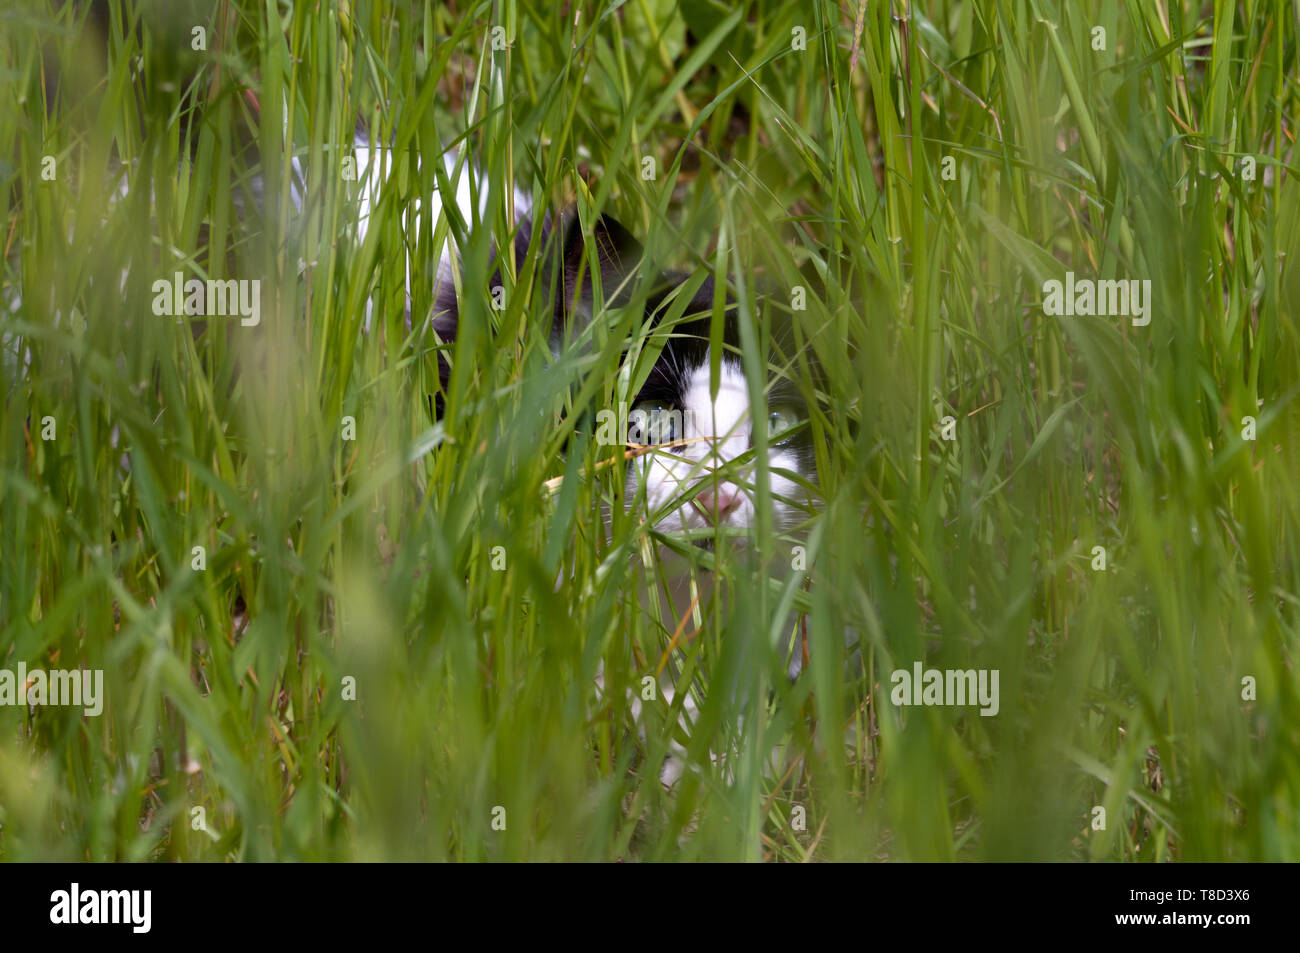 black and white cat hiding in the grass Stock Photo